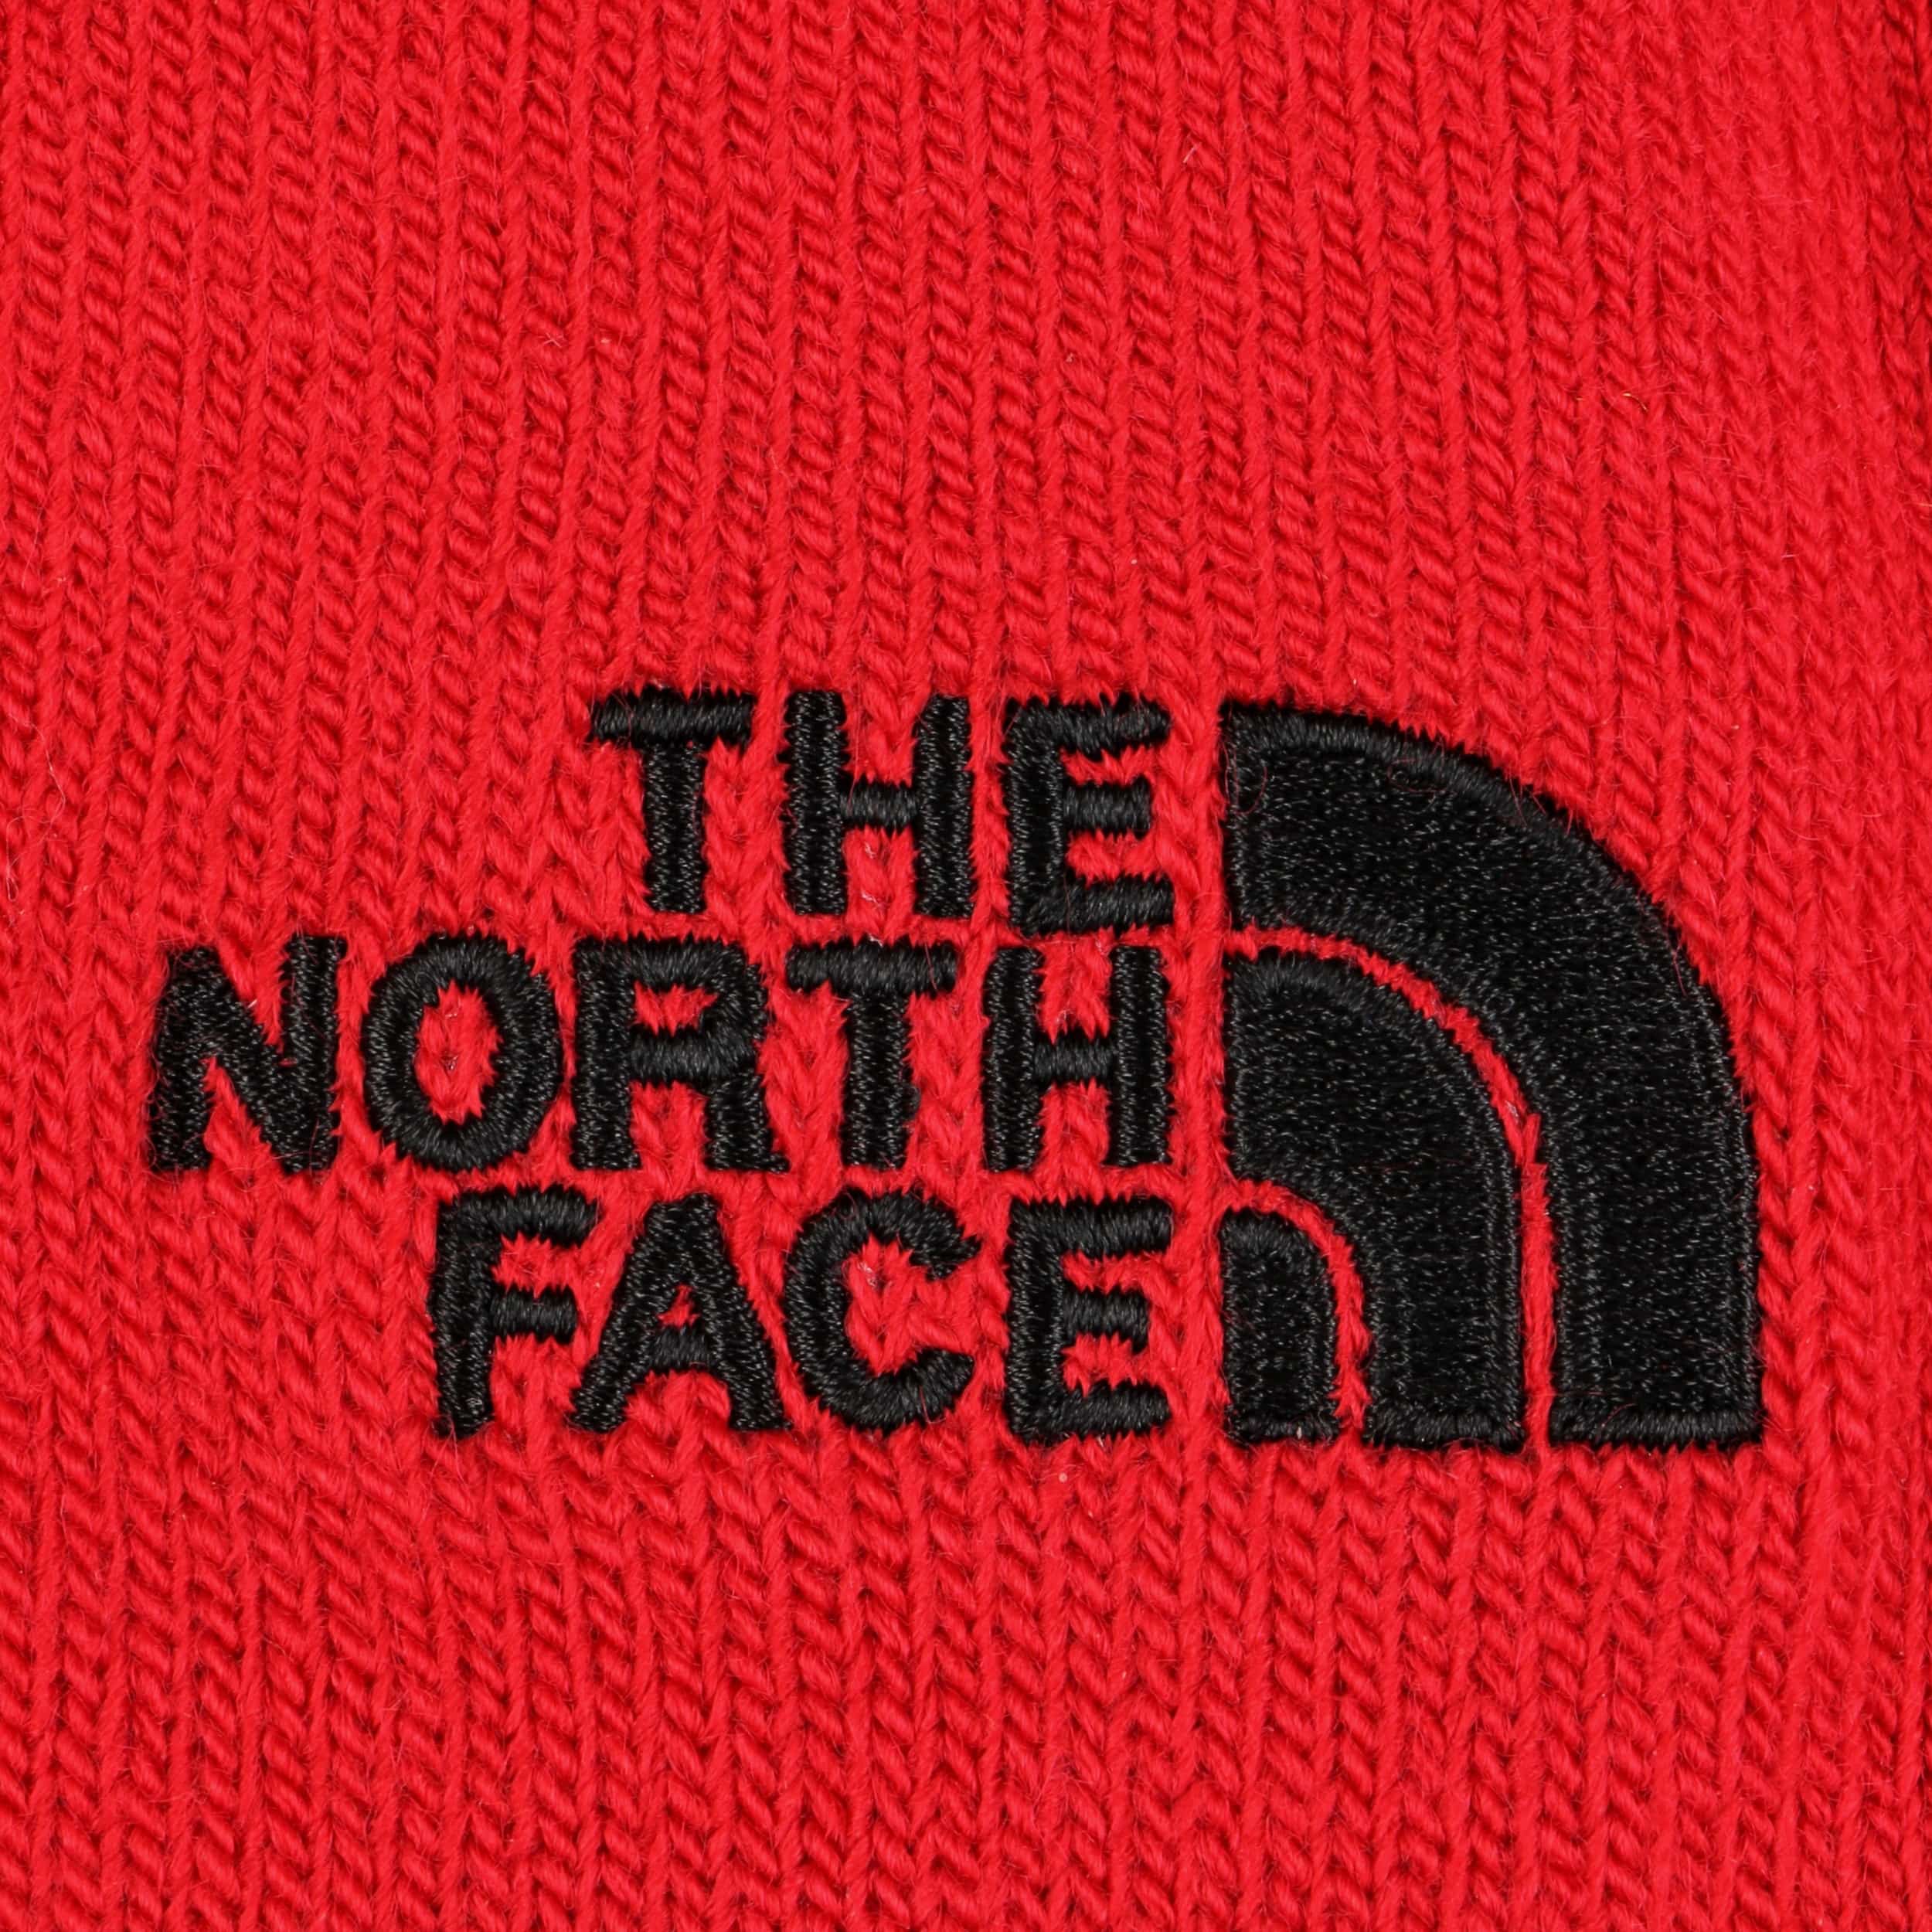 Rev Logo Beanie Hat By The North Face 40 95